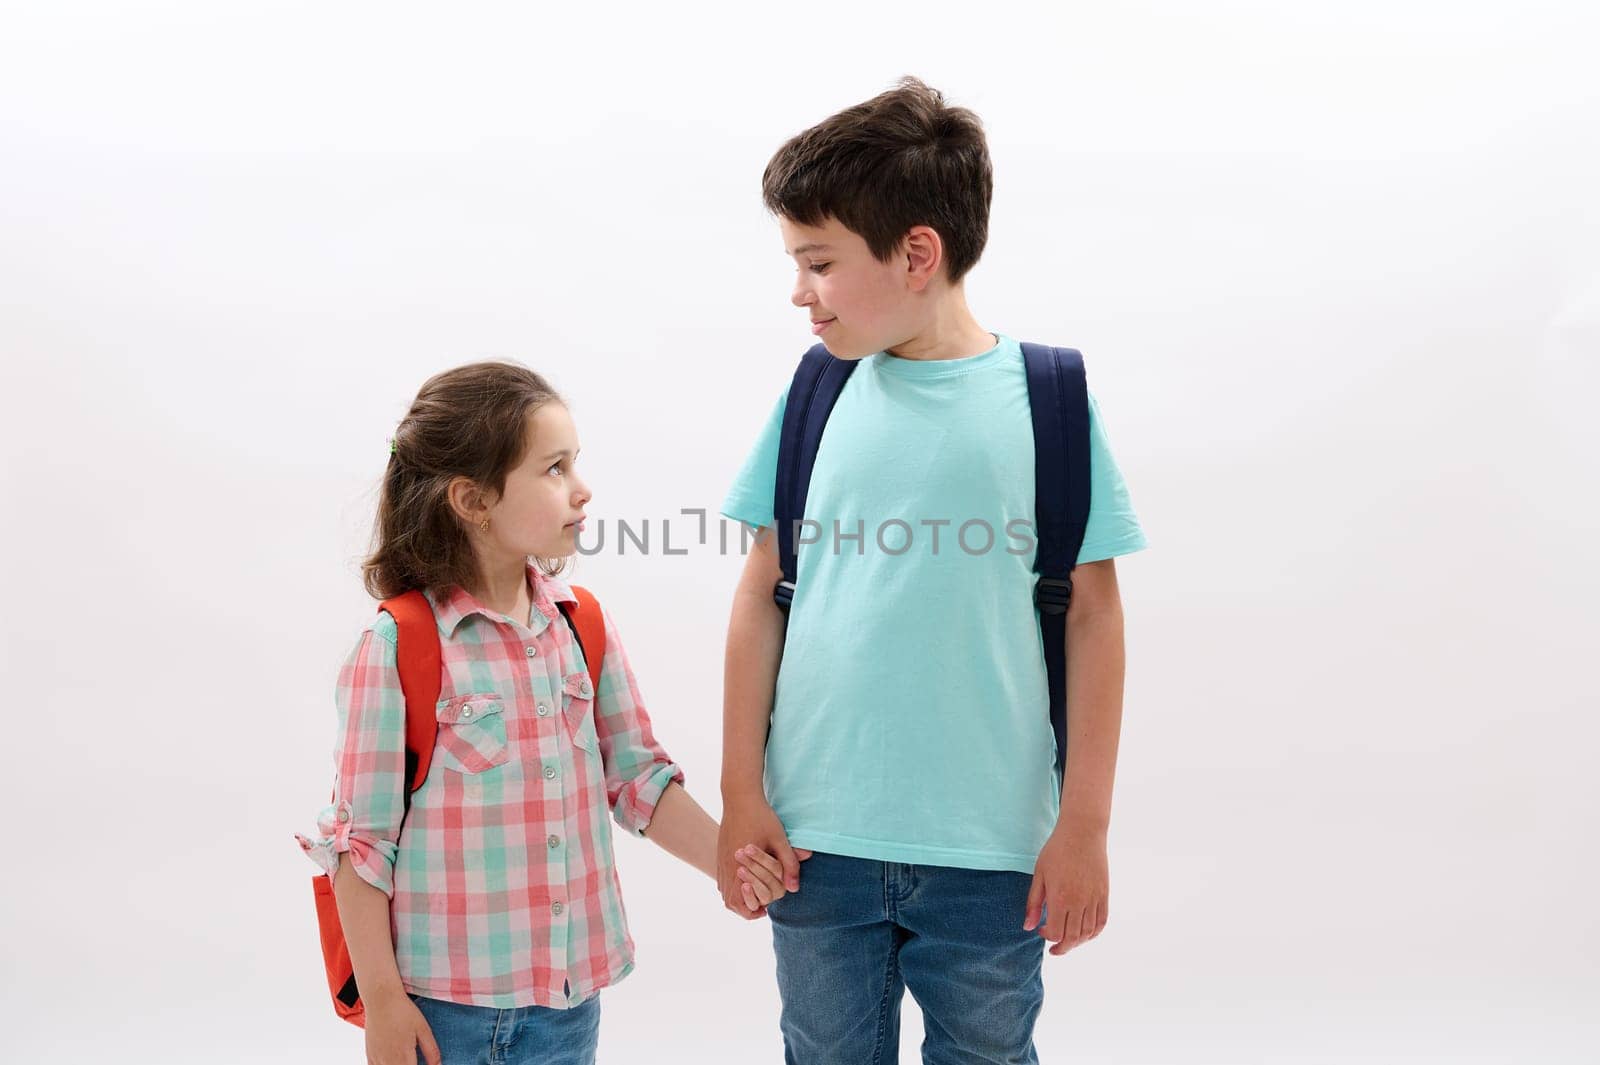 Happy schoolkids, brother and sister holding hands, going to the school, smiling looking at each other, isolated on white backdrop.